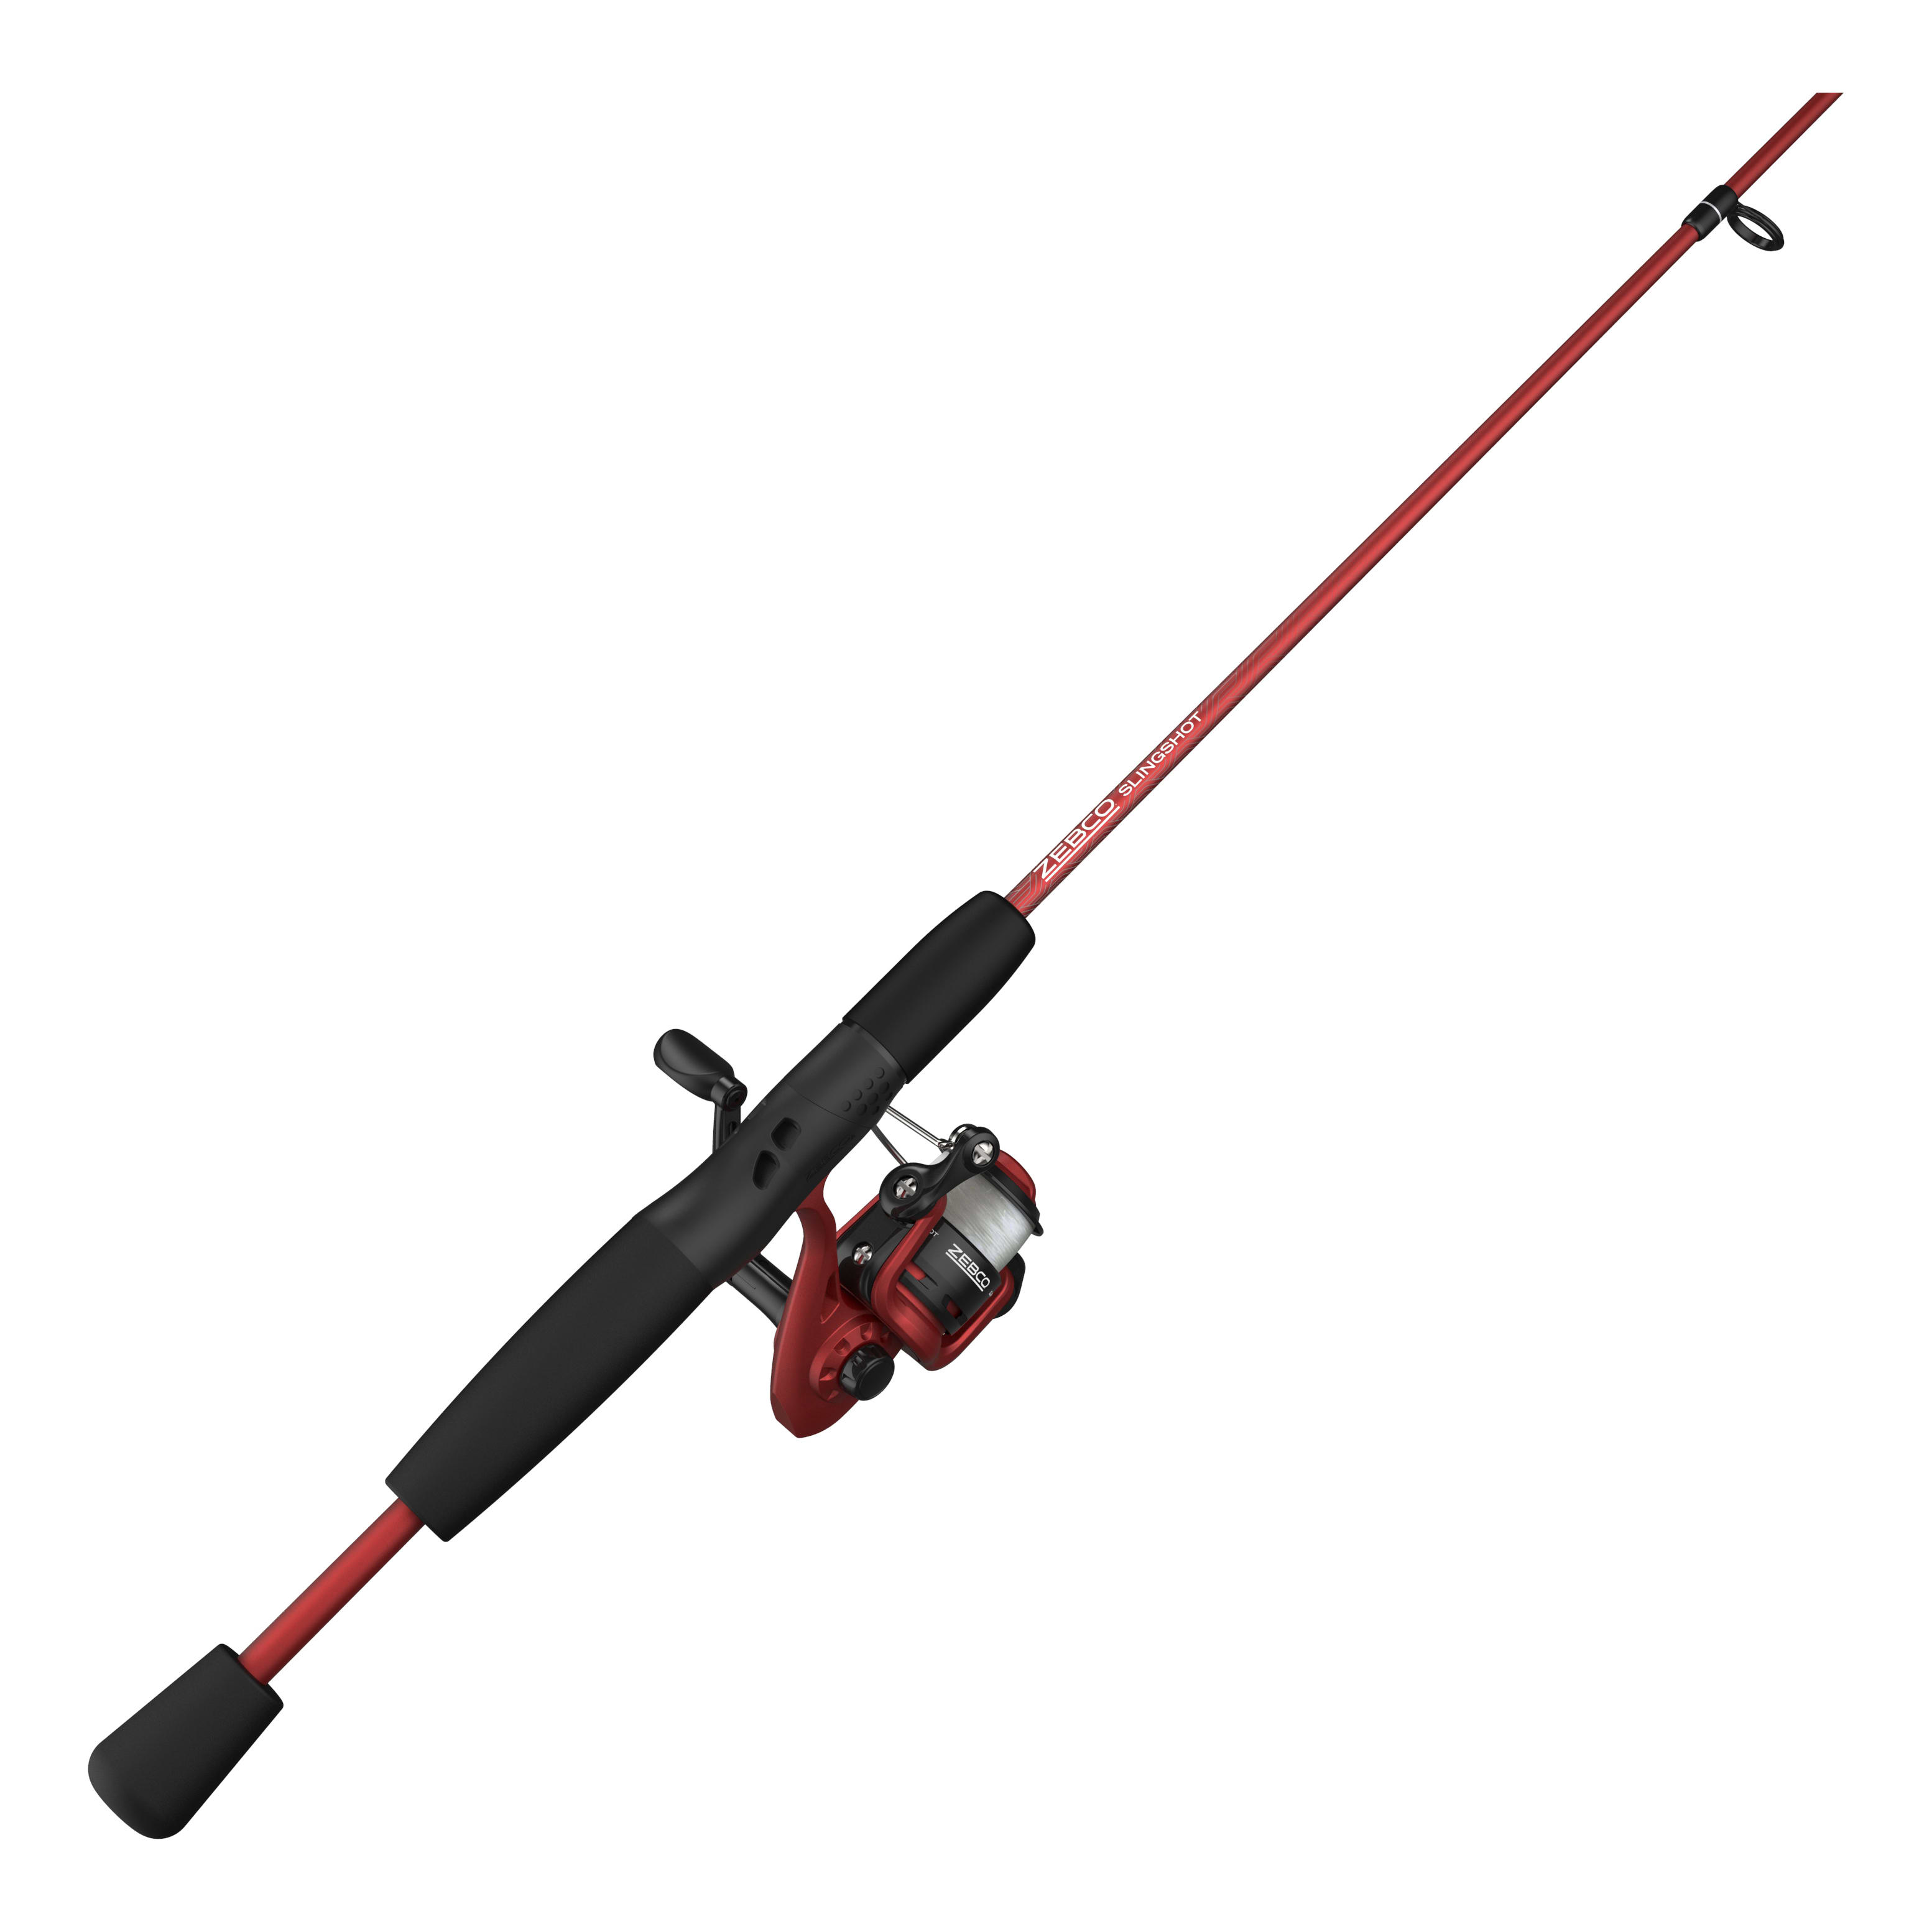 Shakespeare Catch More Fish Spinning Reel and Fishing Rod Combo, Bass, 6' 6